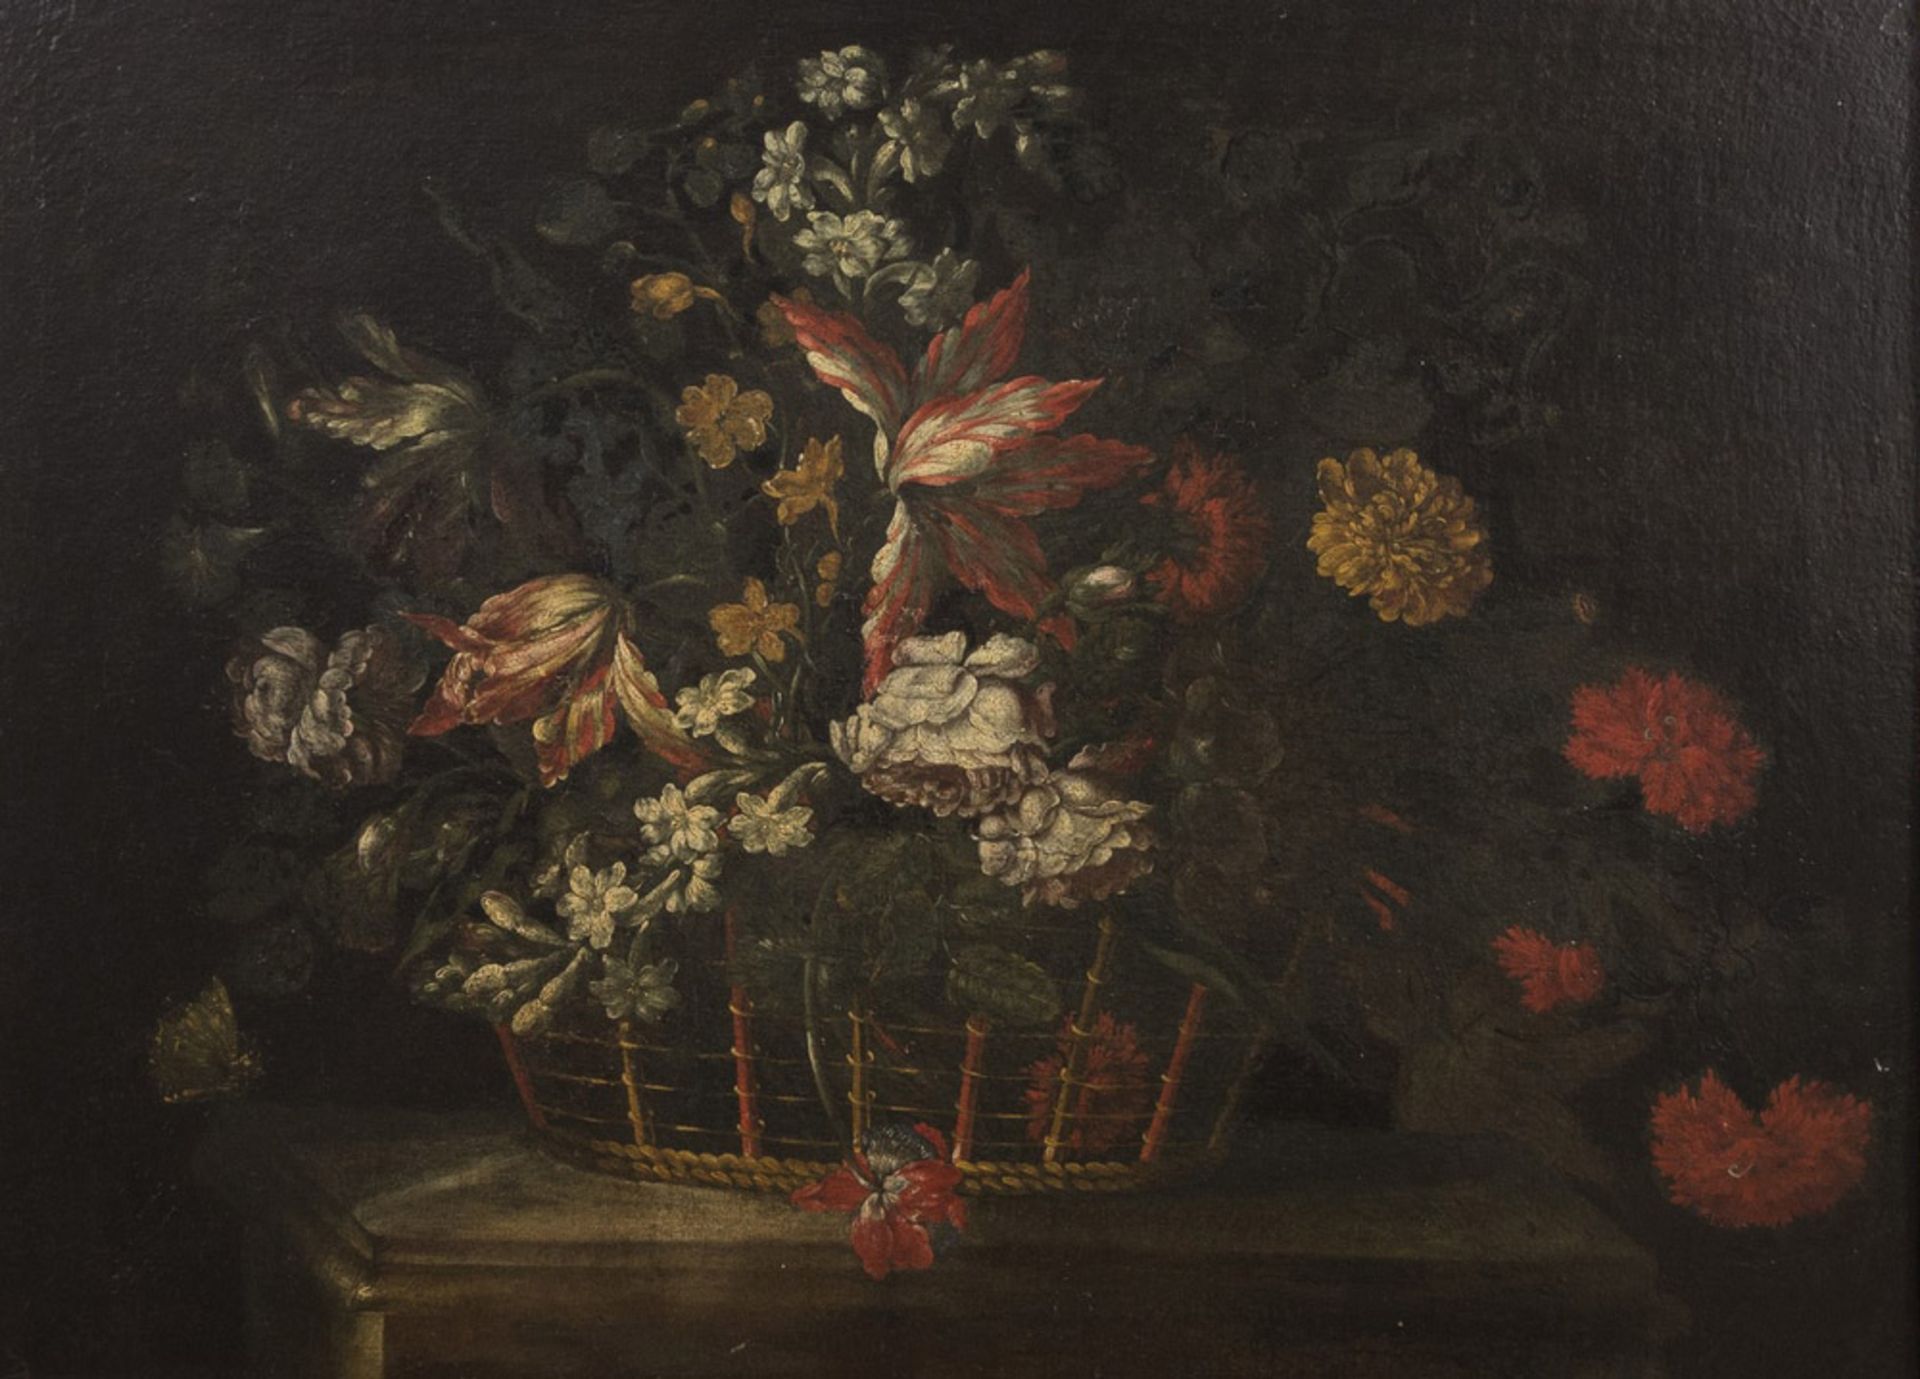 TUSCAN PAINTER, 17TH CENTURY CHEST WITH COMPOSITION OF FLOWERS ON TABLE Oil on canvas, cm. 63 x 86